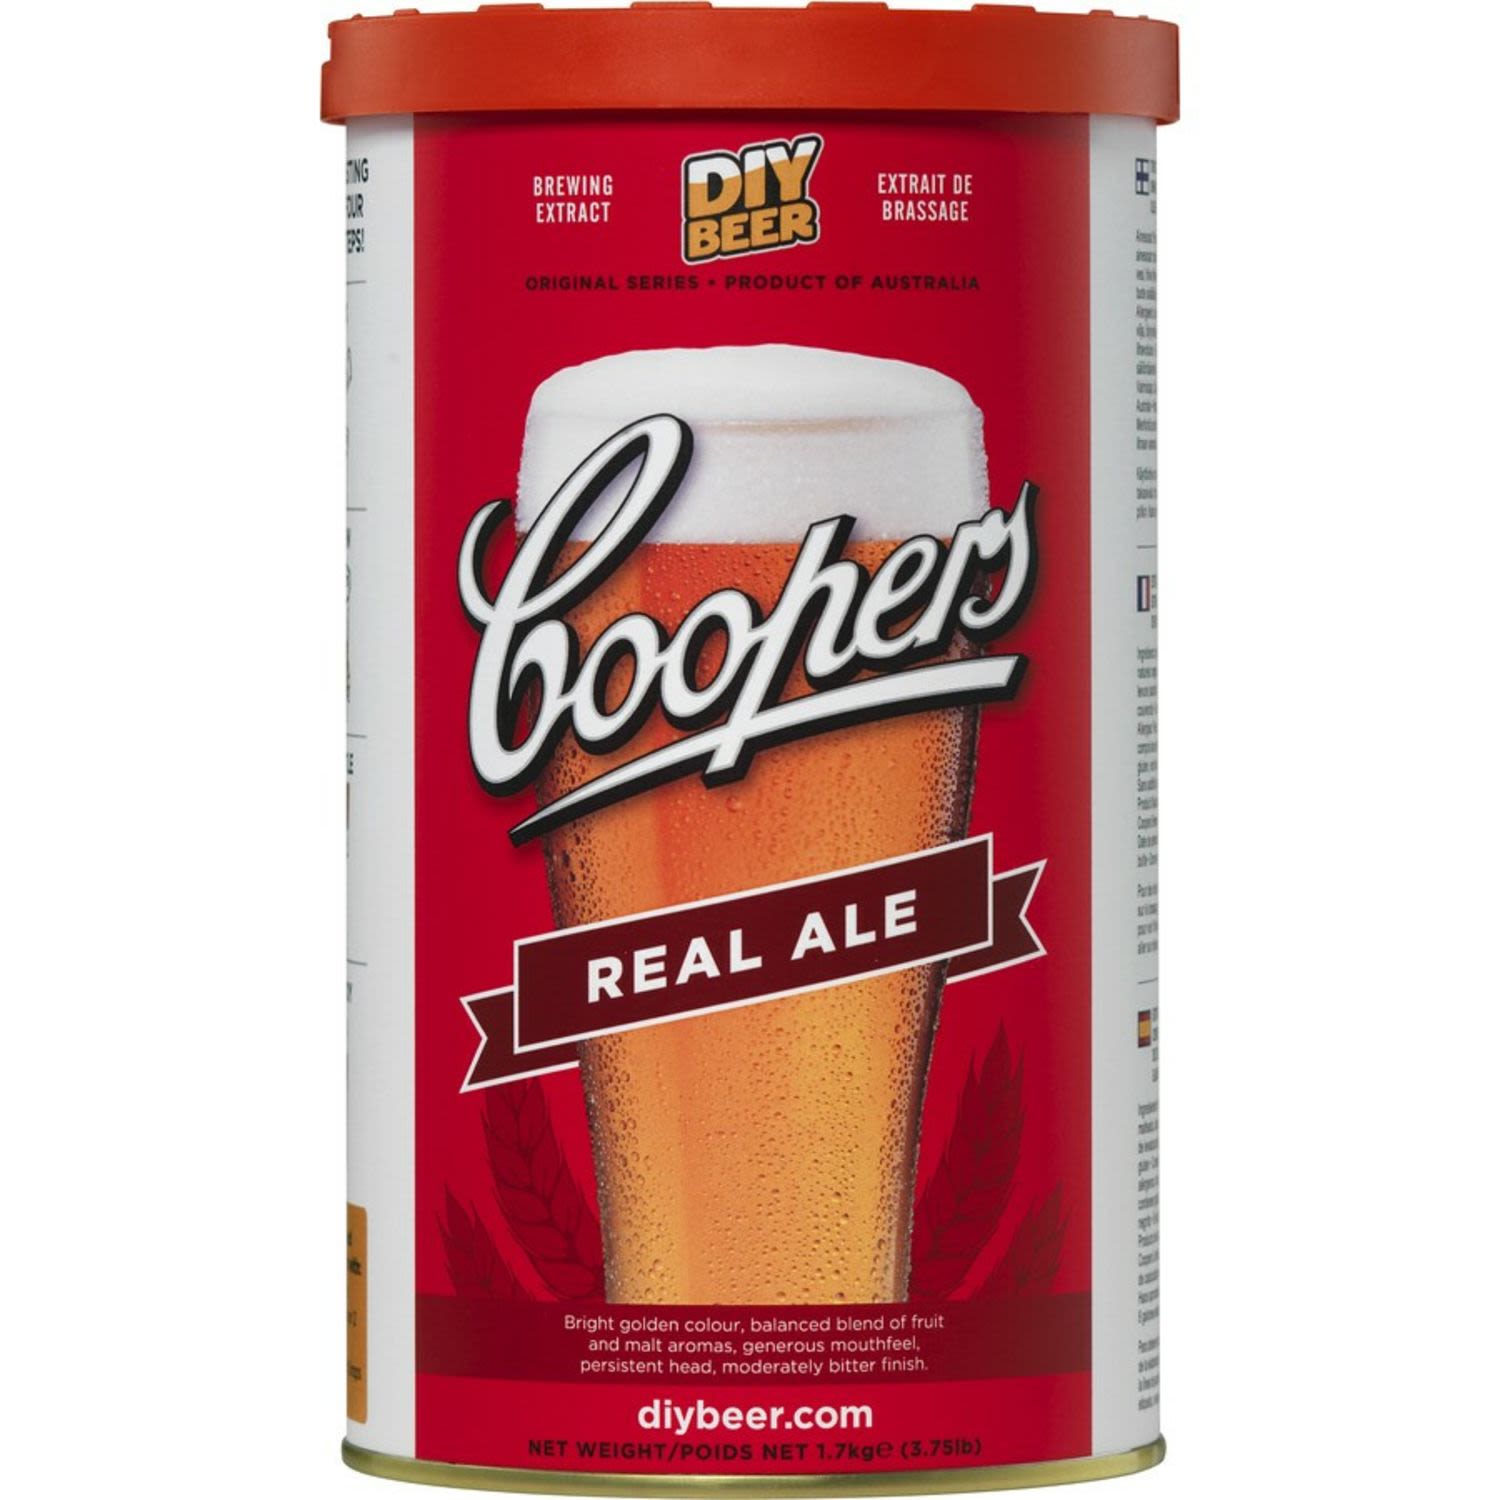 Coopers Home Brew Real Ale, 1.7 Kilogram